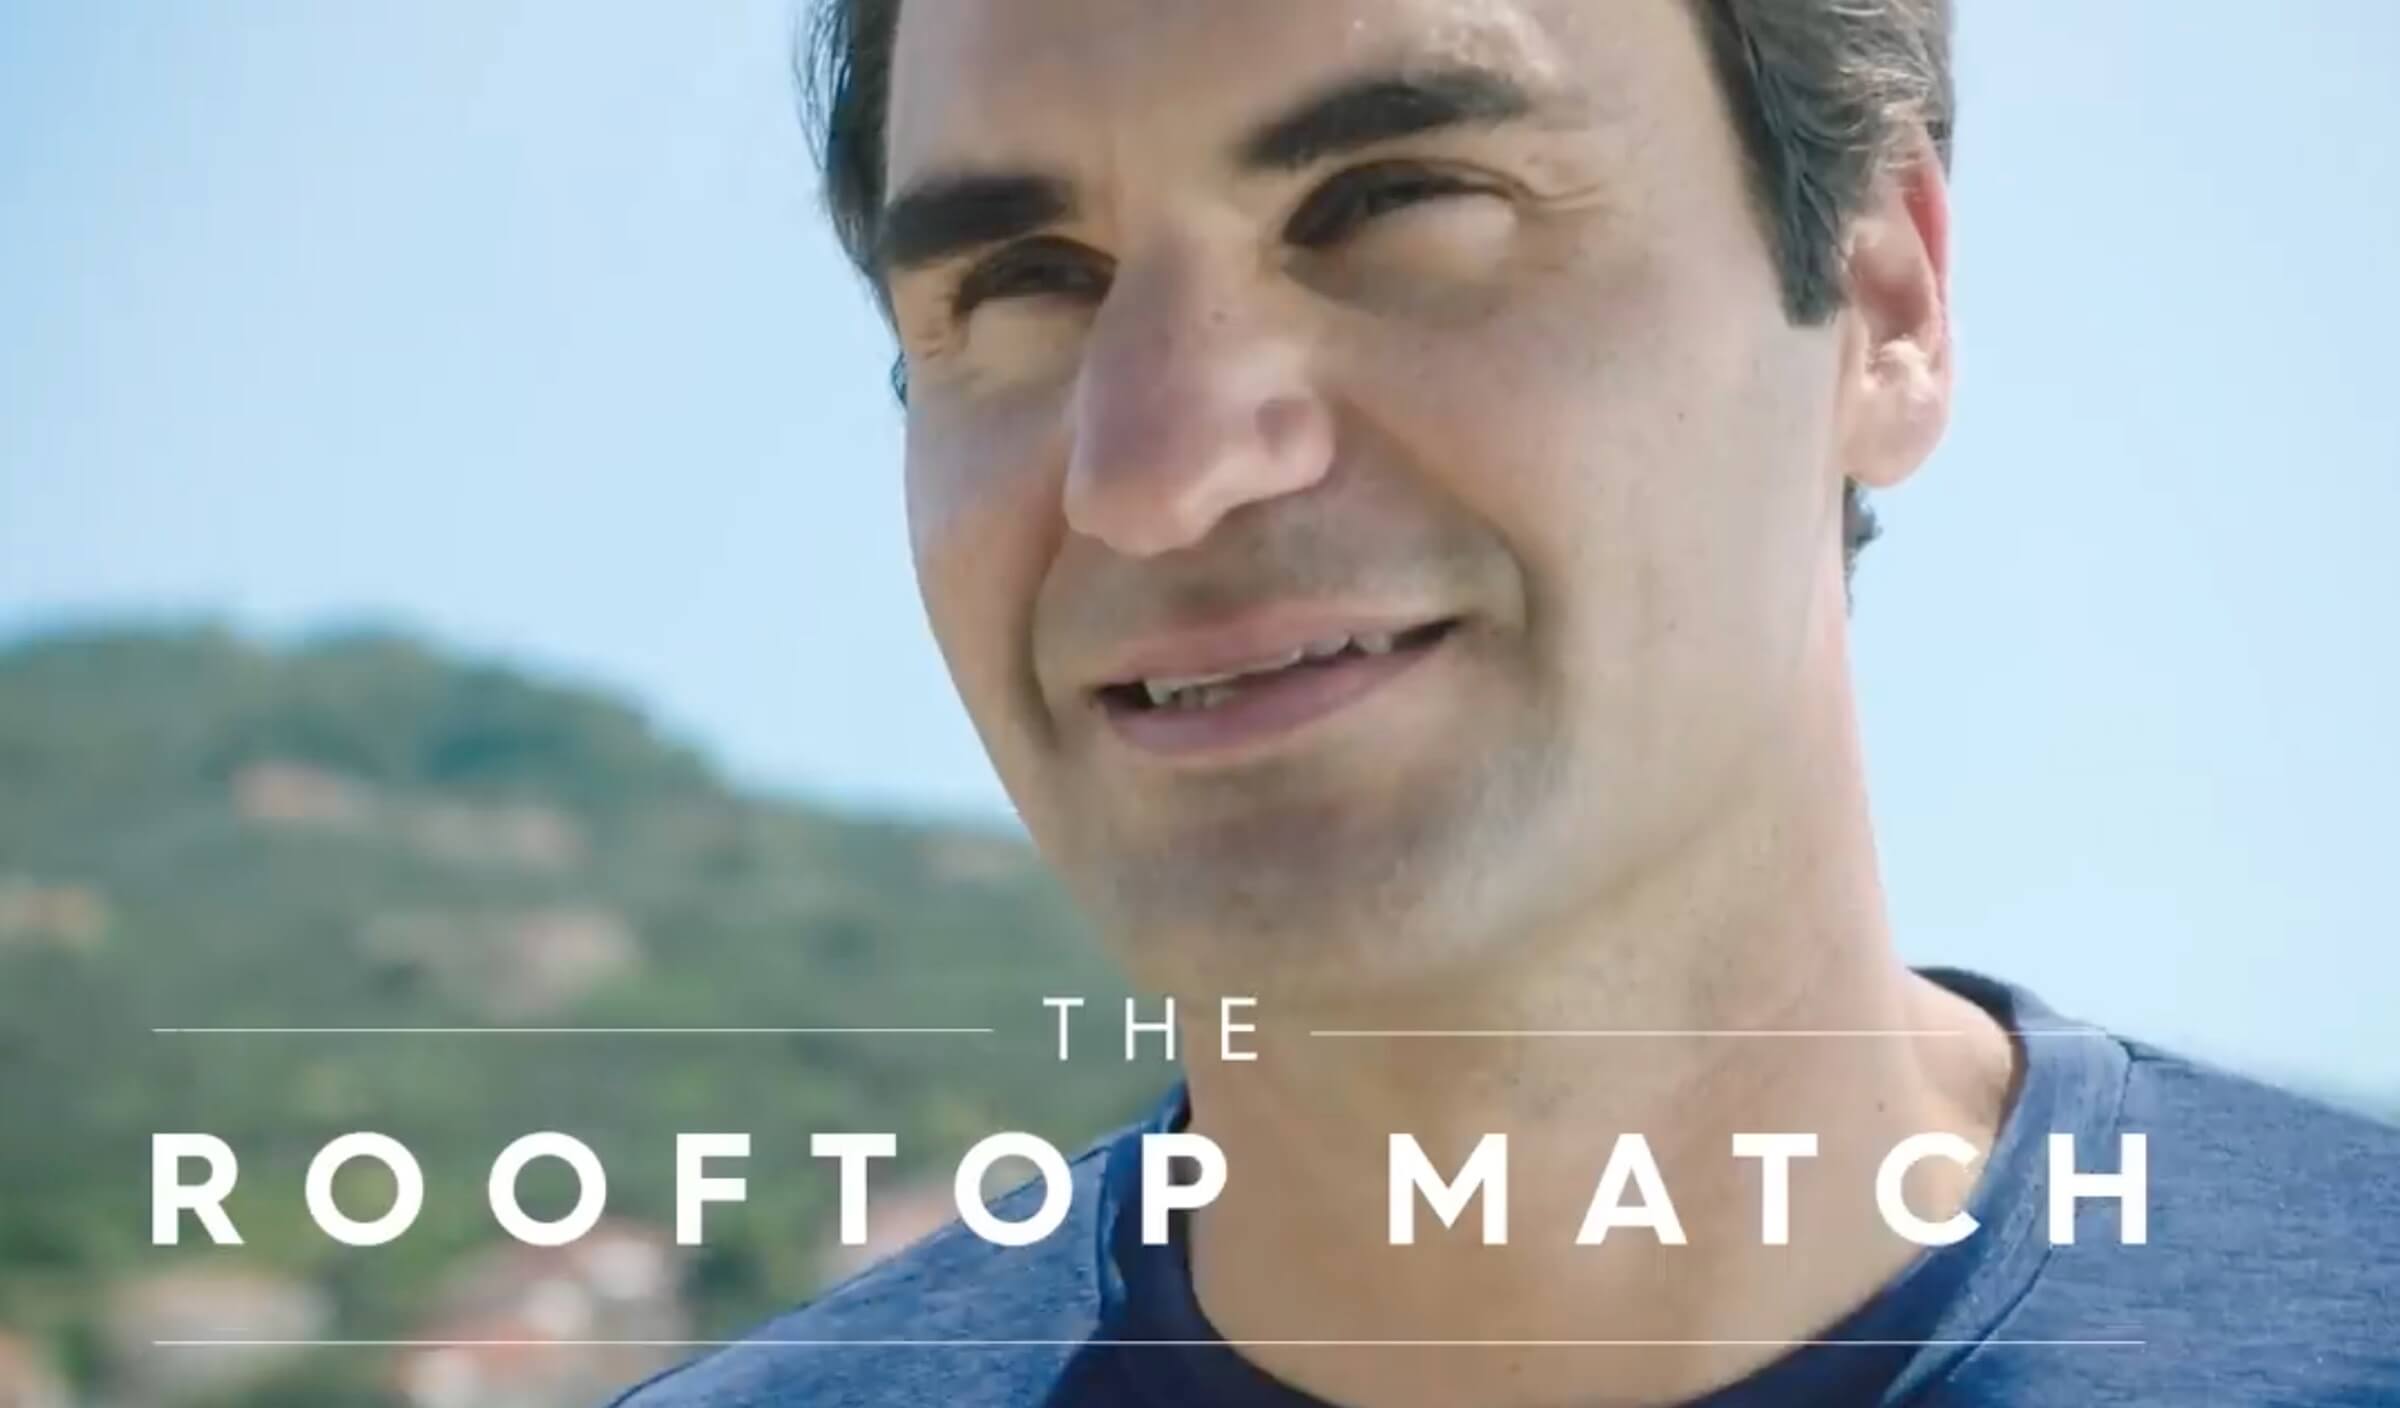 Barilla: The Rooftop Match with Roger Federer - Not your ordinary Tennis Match The Rooftop Match Campaigns of the World®